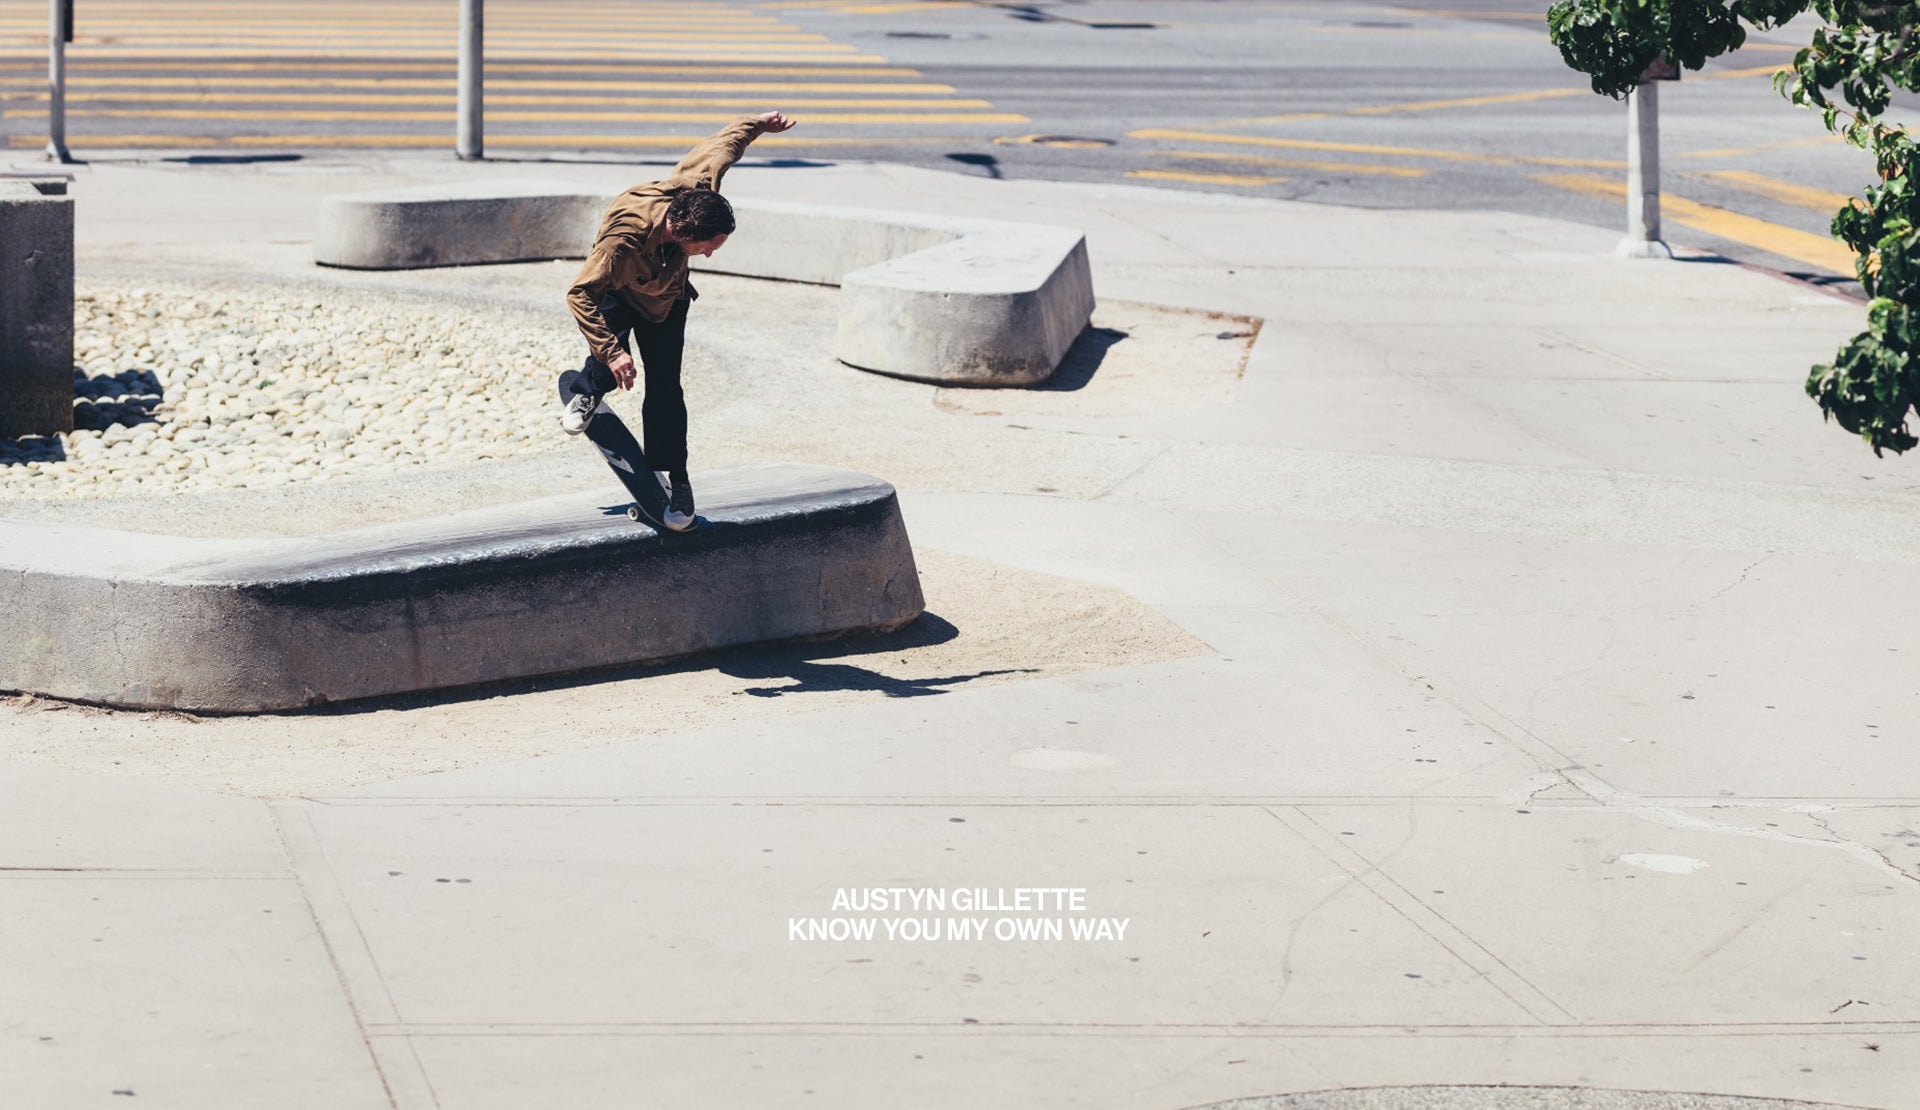 Load video: Austyn Gillette &quot;know you my own way&quot; Globe Skateboarding Part